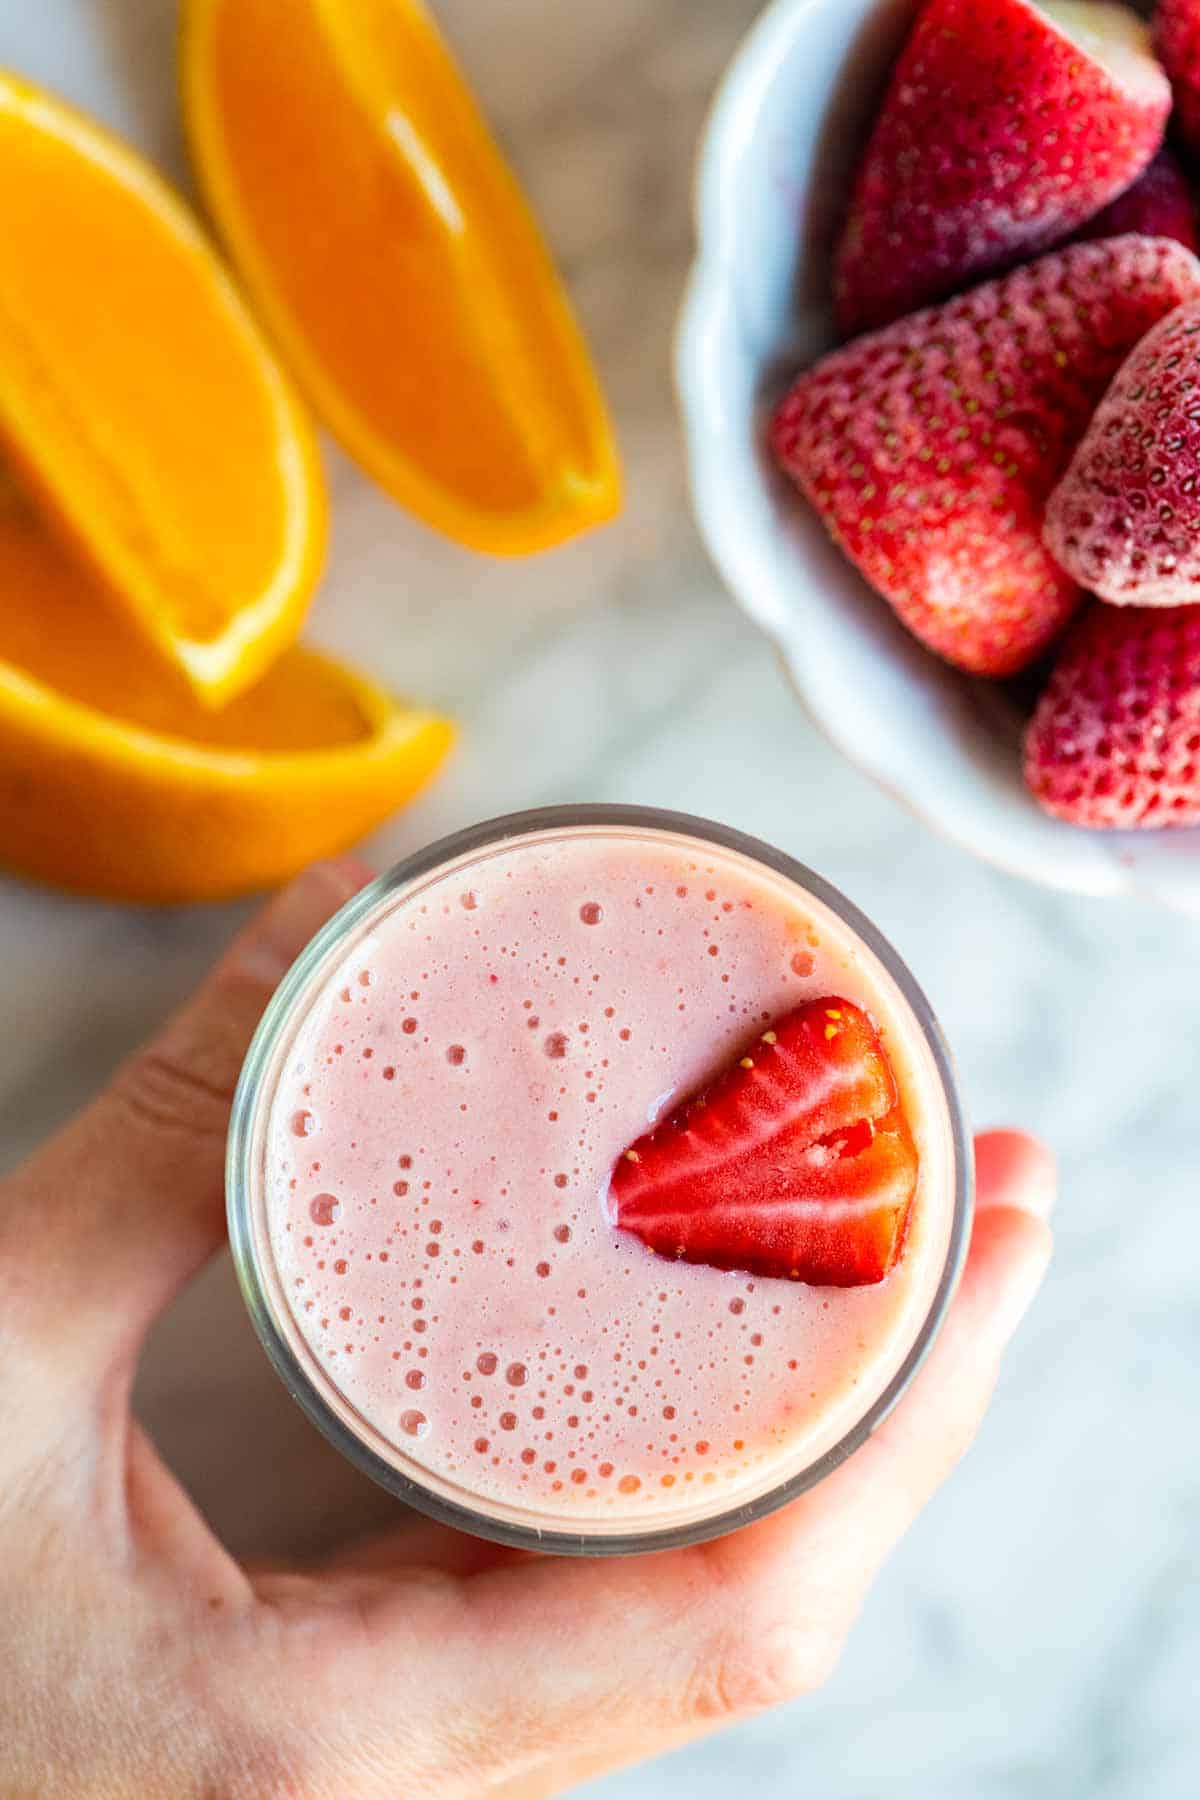 Creamy pineapple and strawberry breakfast smoothies - Simply Delicious